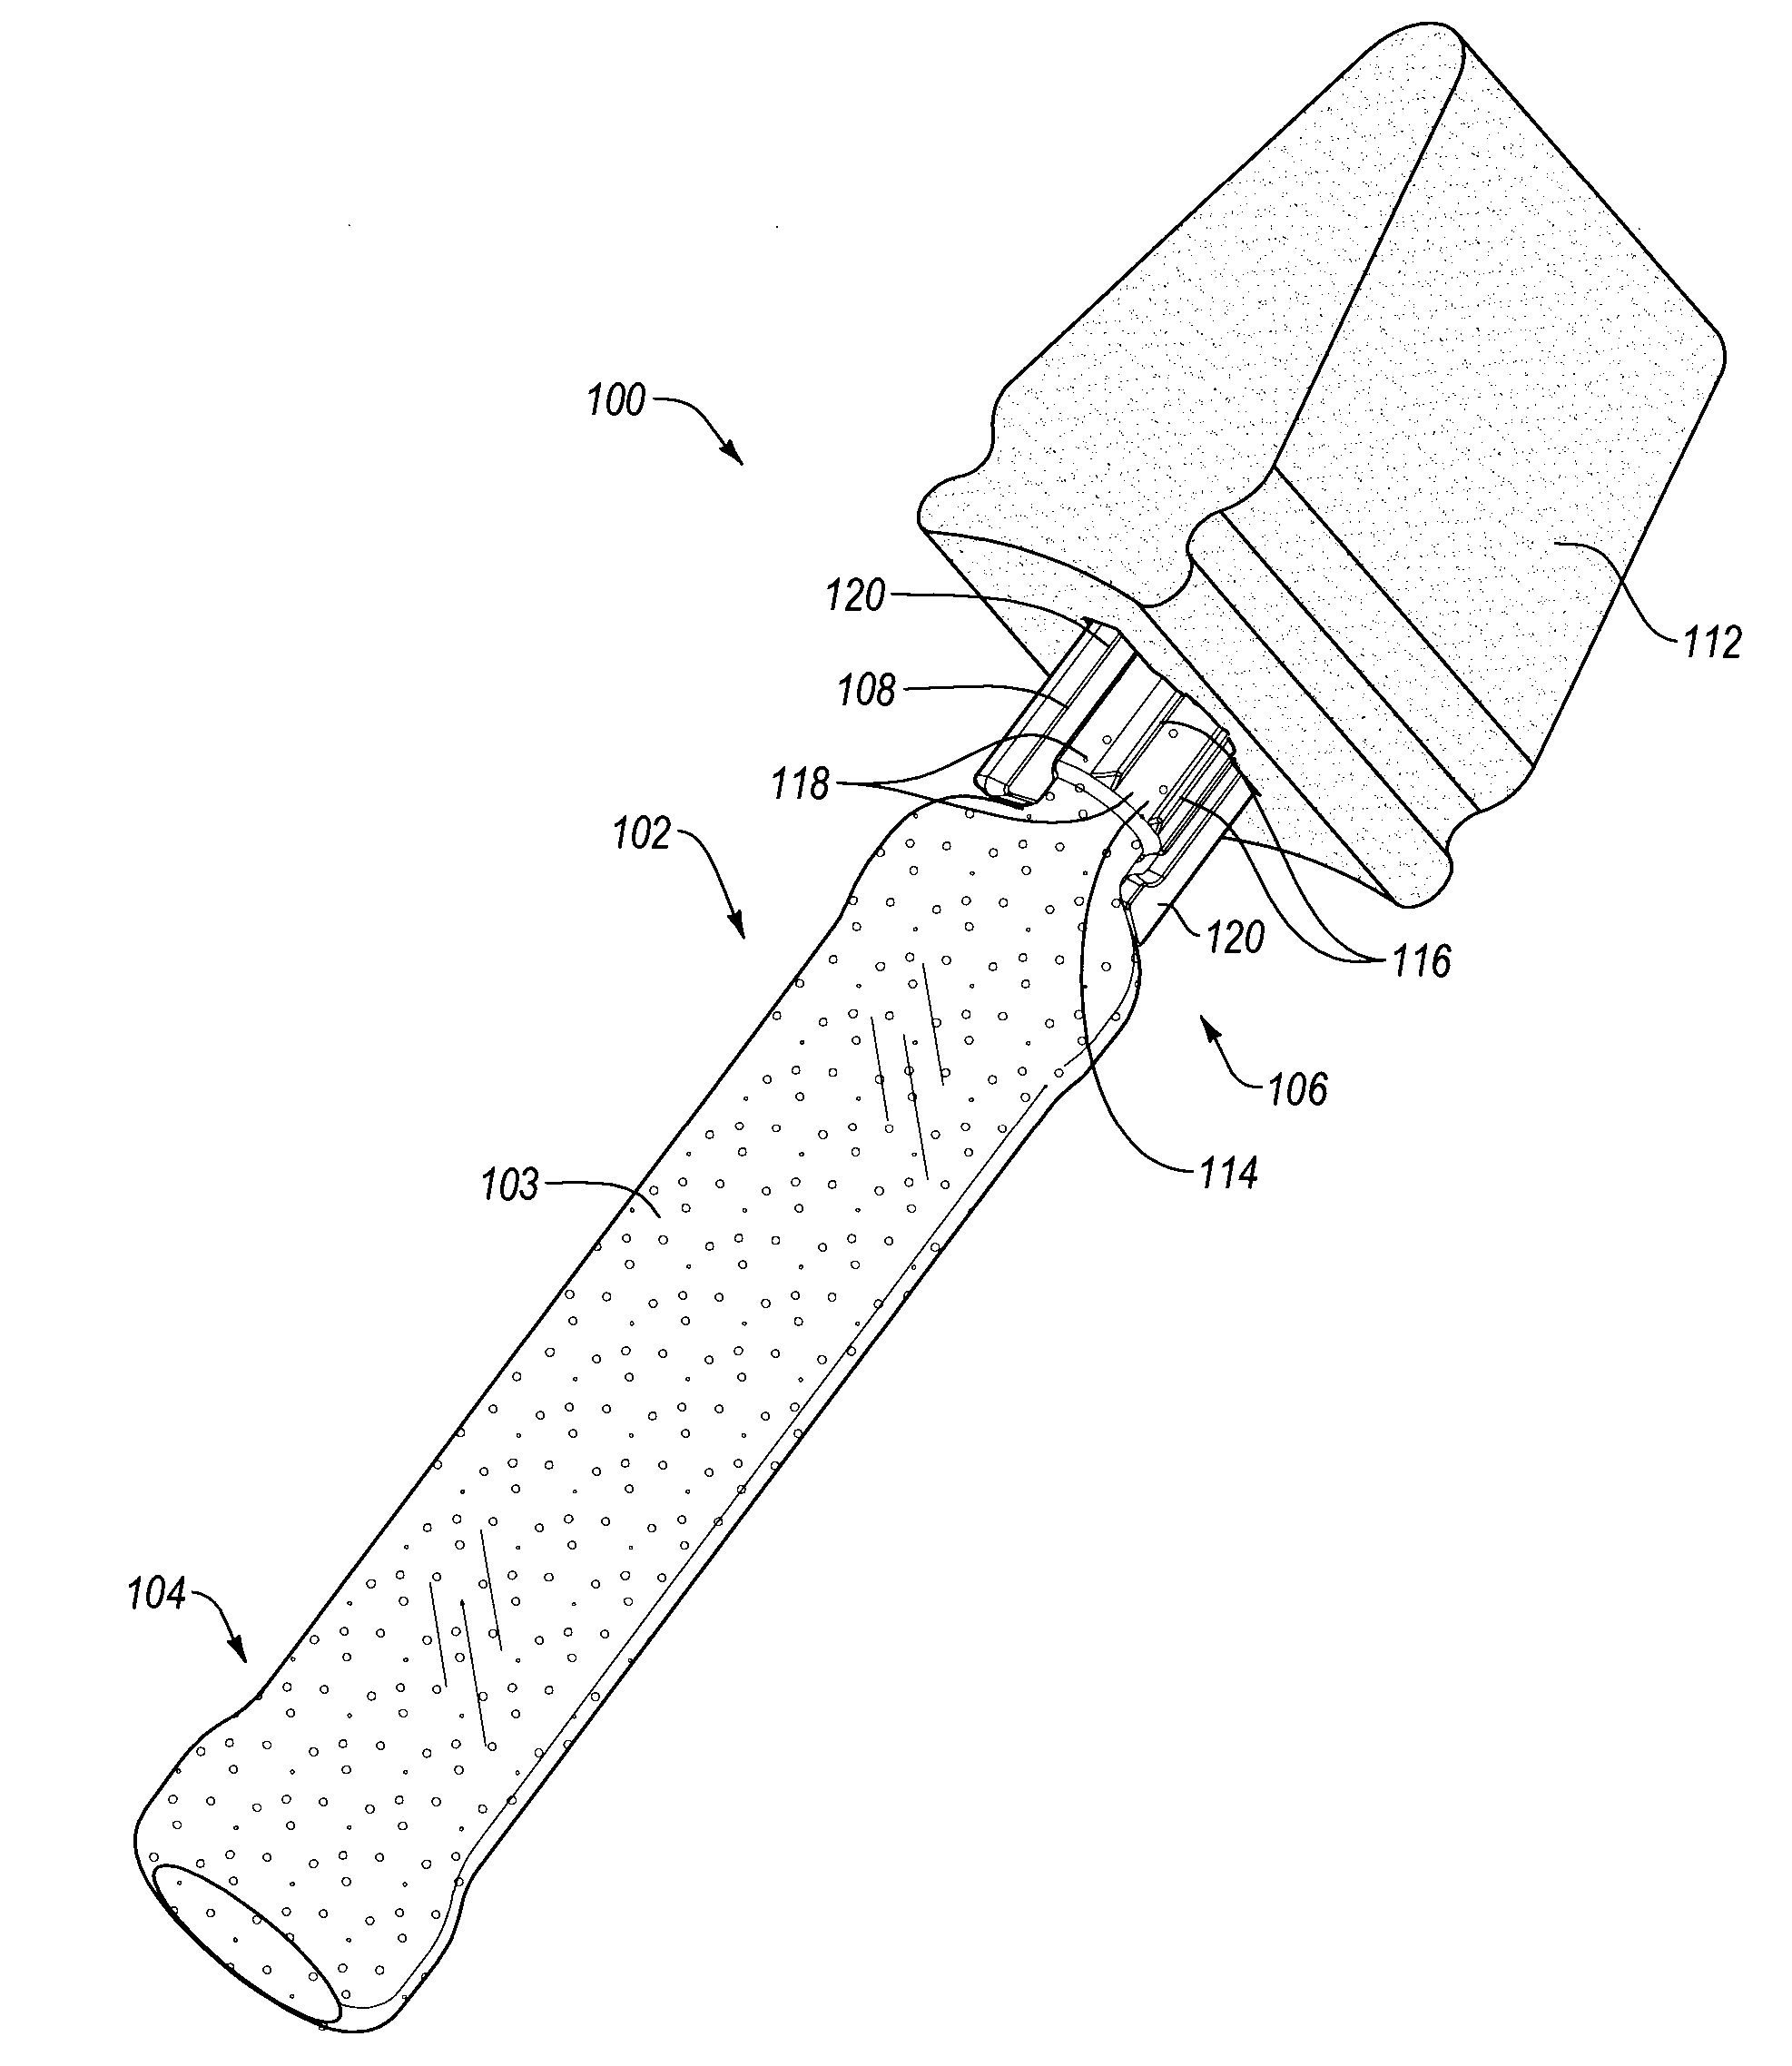 Skin antiseptic applicator and methods of making and using the same